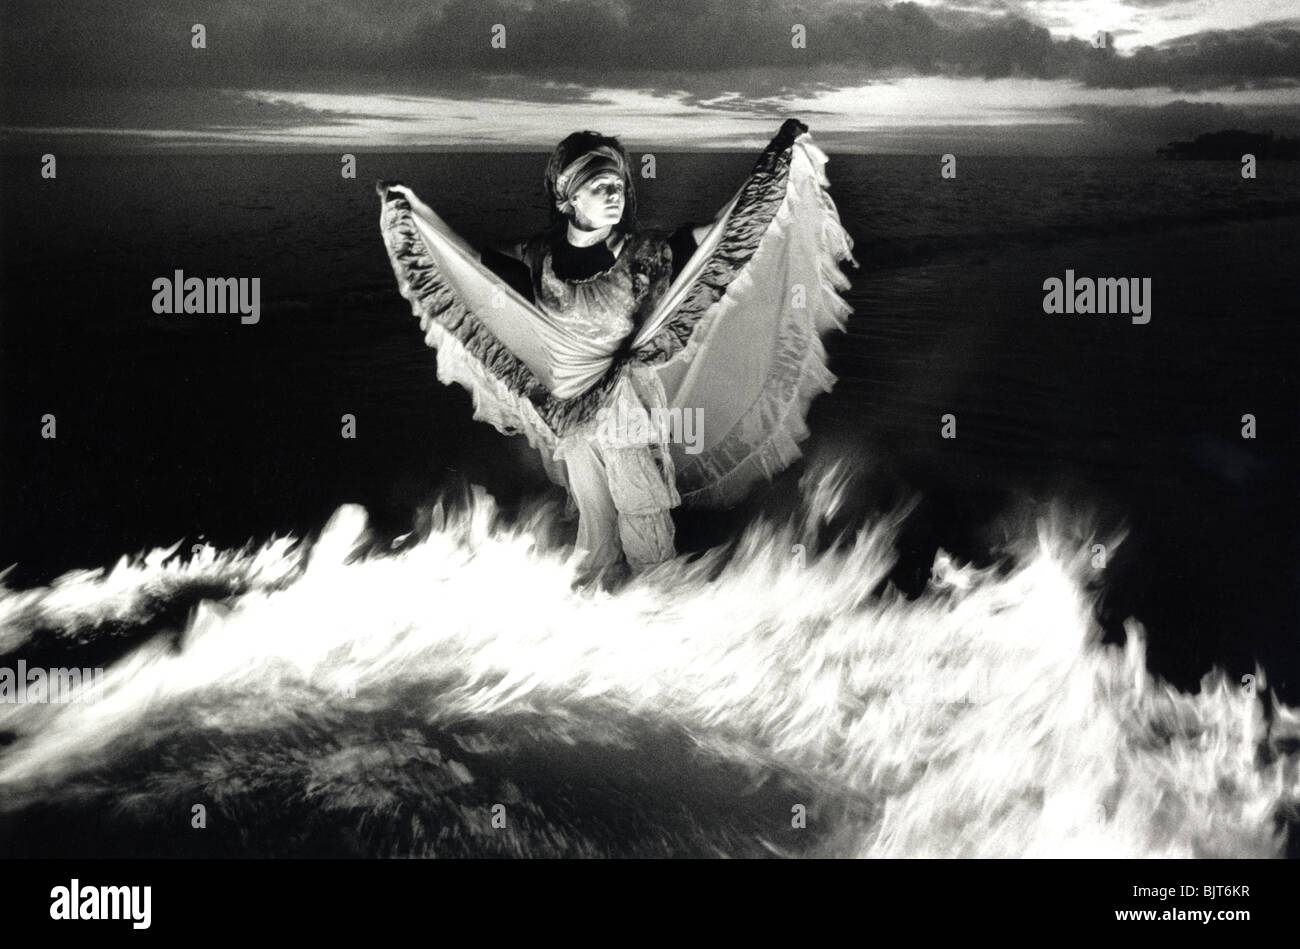 A Brighton Festival performer, playing with fire in the sea on Brighton Beach. Health and Safety officials restricted her act. Stock Photo